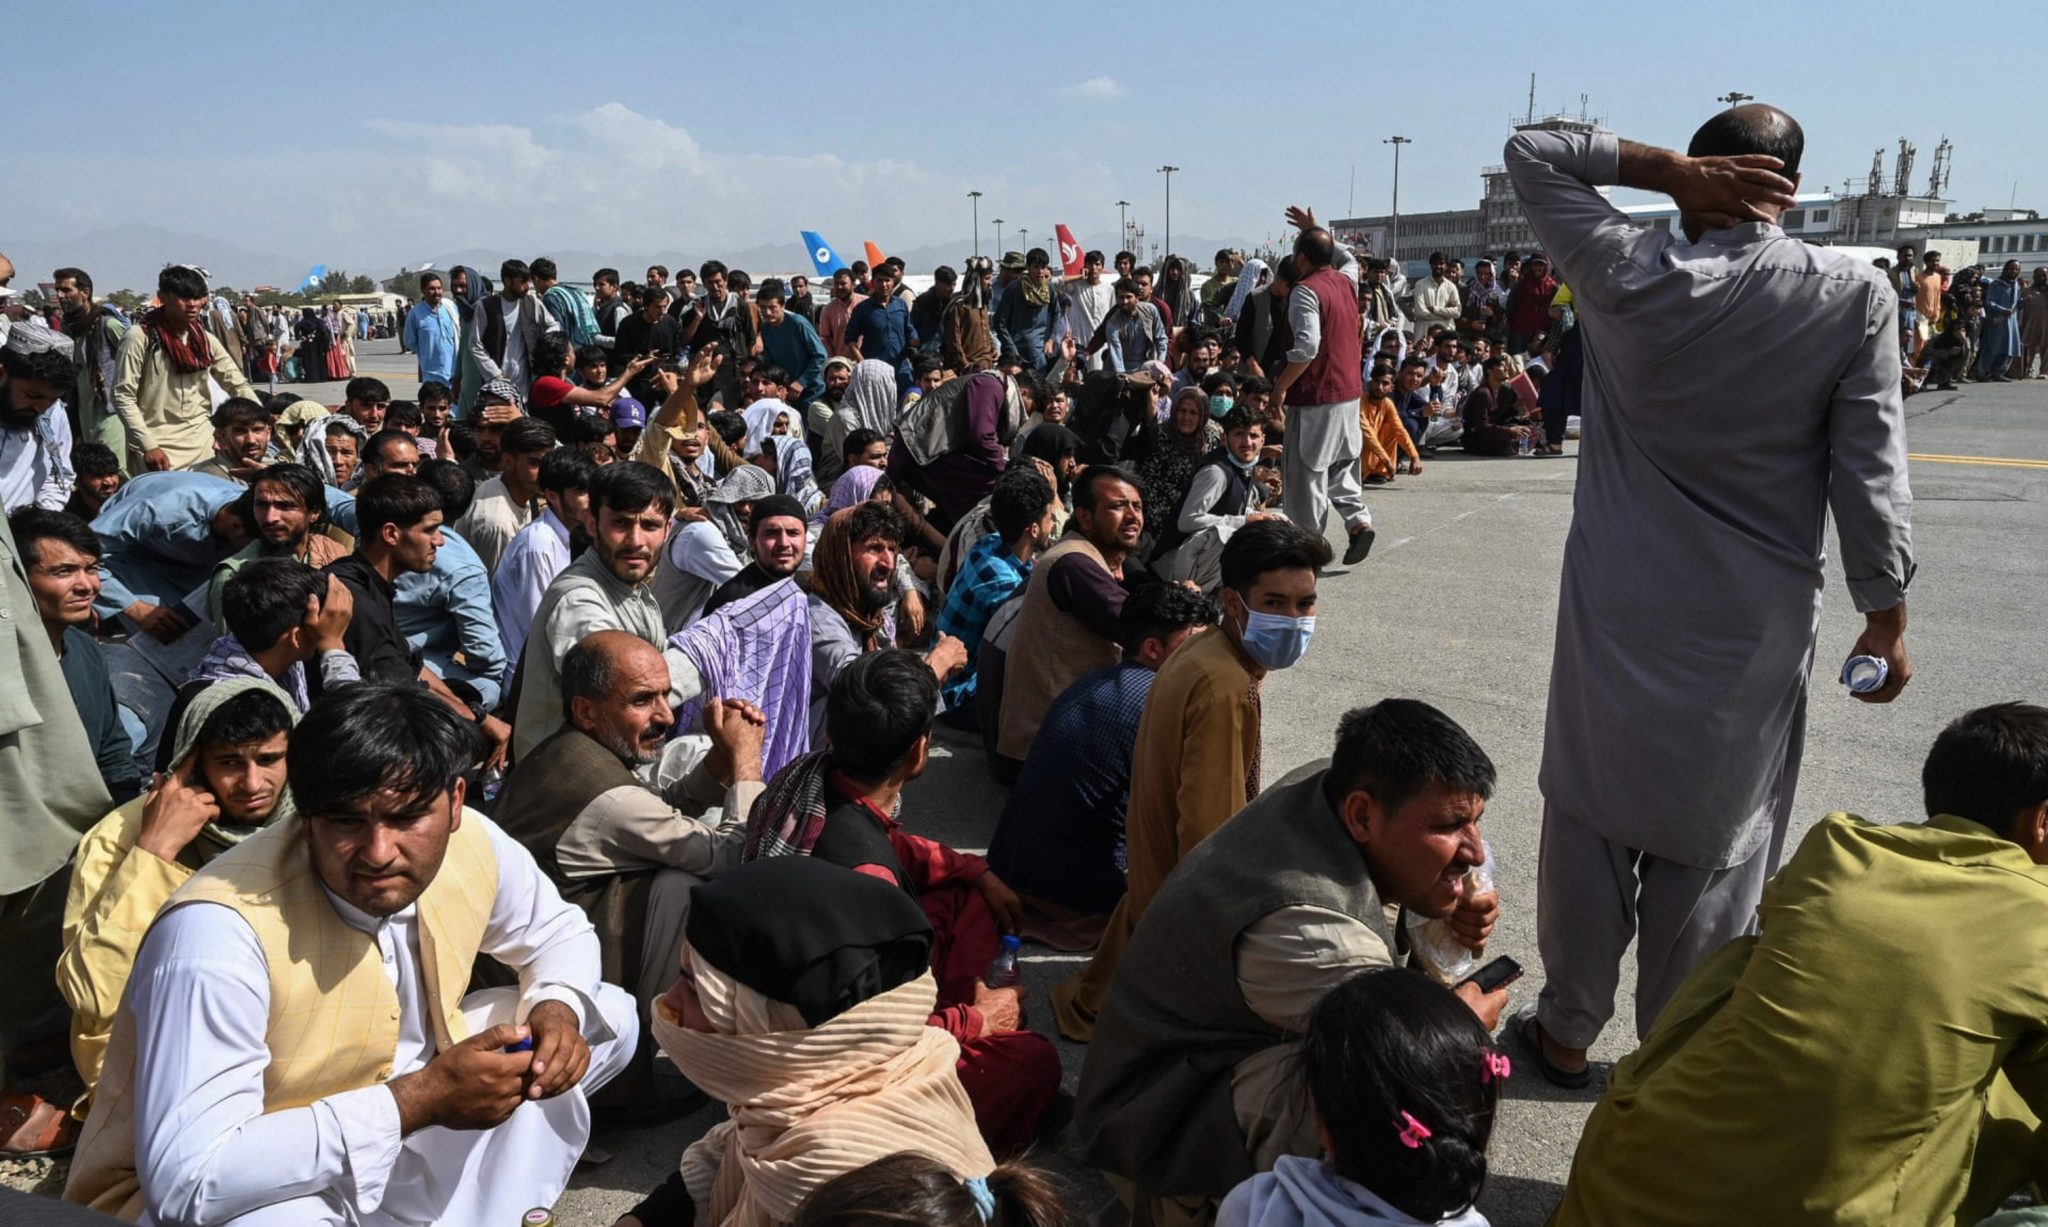 After the U.S. withdrawal of troops and the Western-backed government’s fall to the Taliban, Afghan citizens fled to the Hamid Karzai International Airport in the hope of catching a flight out of the country. (John Smith 2021 / Shutterstock.com) 